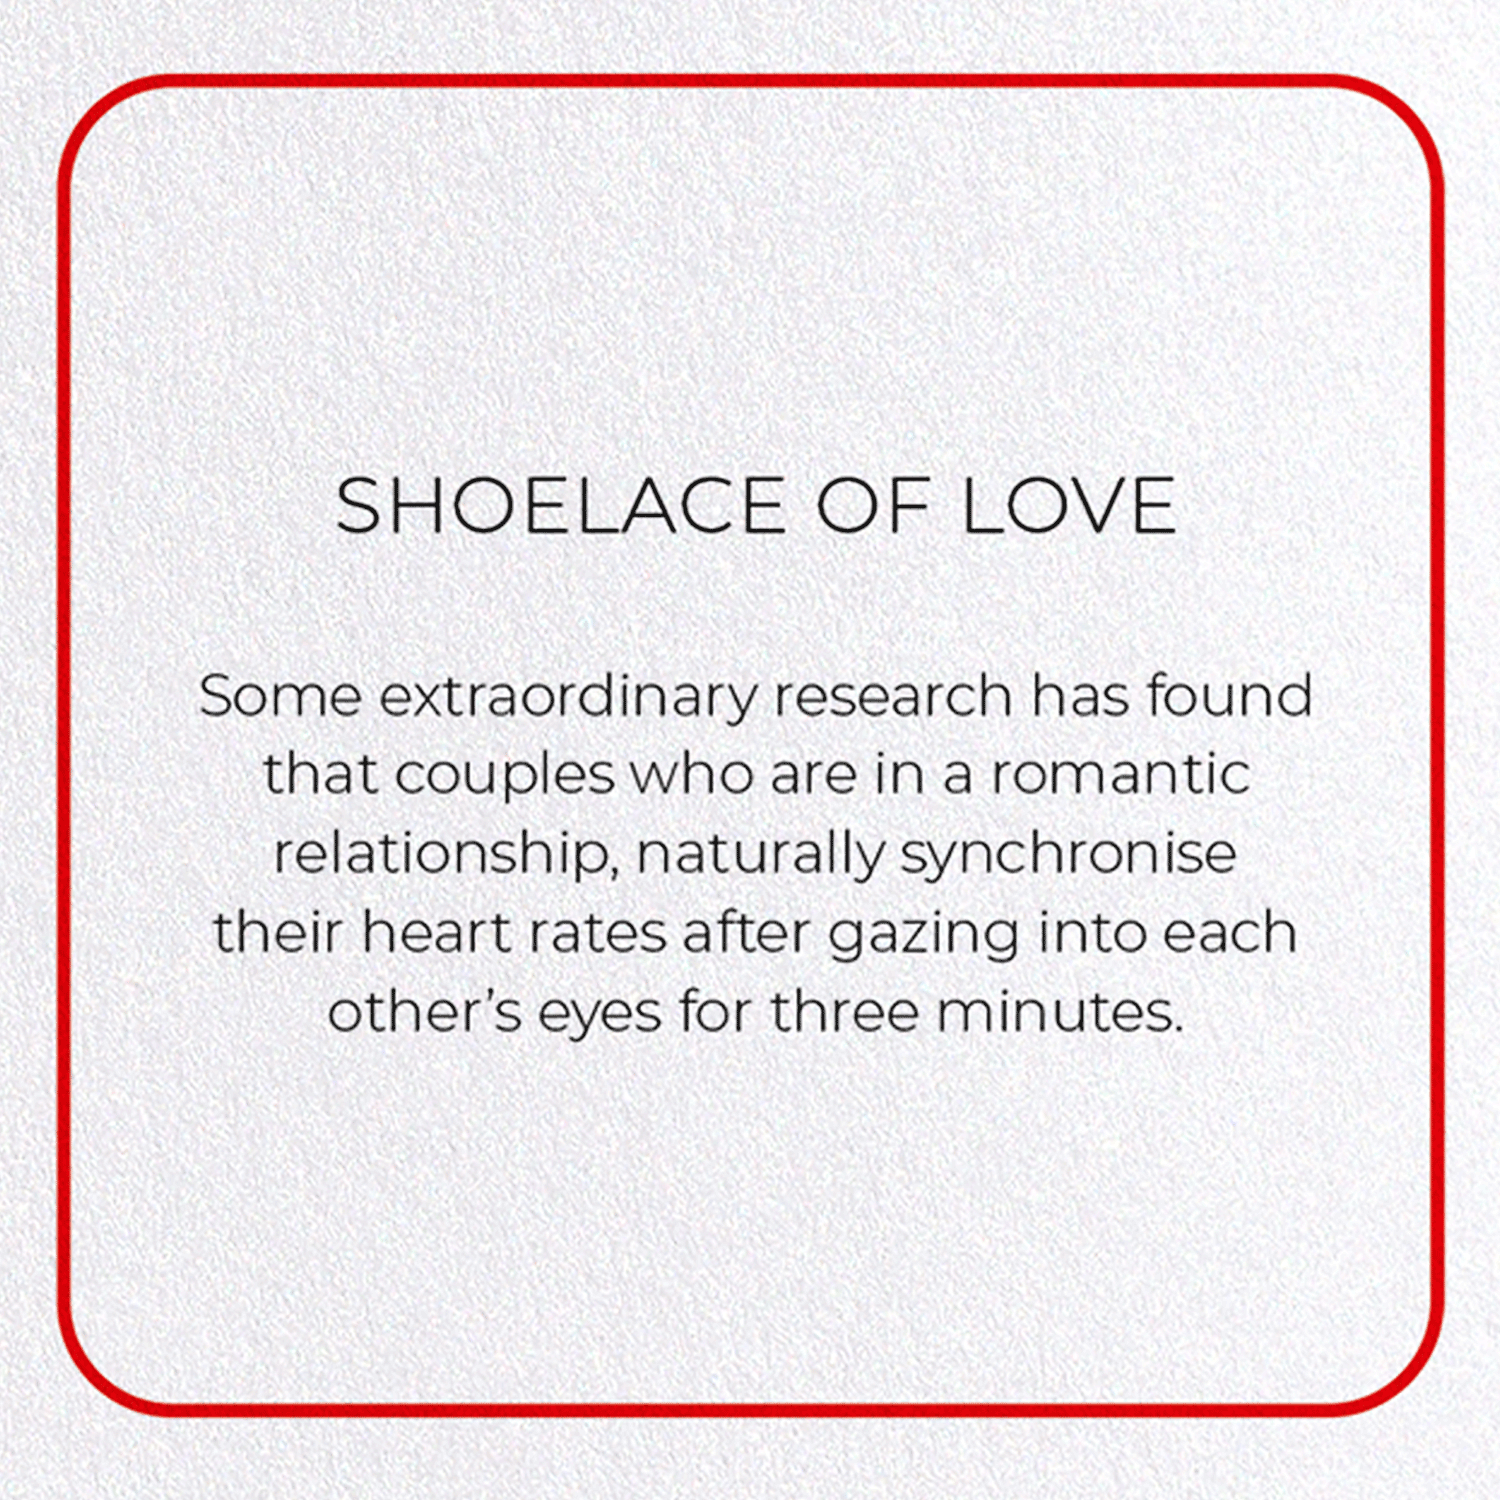 SHOELACE OF LOVE